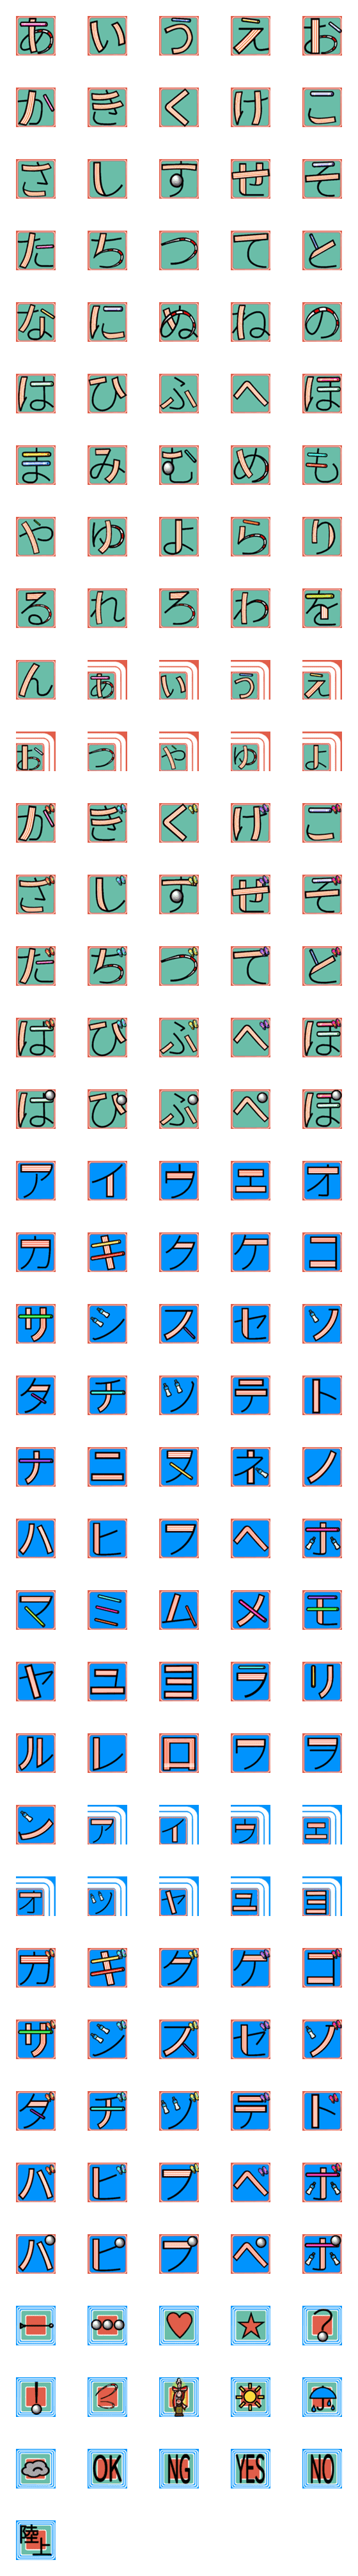 [LINE絵文字]陸上部が使うデコ文字＆絵文字の画像一覧